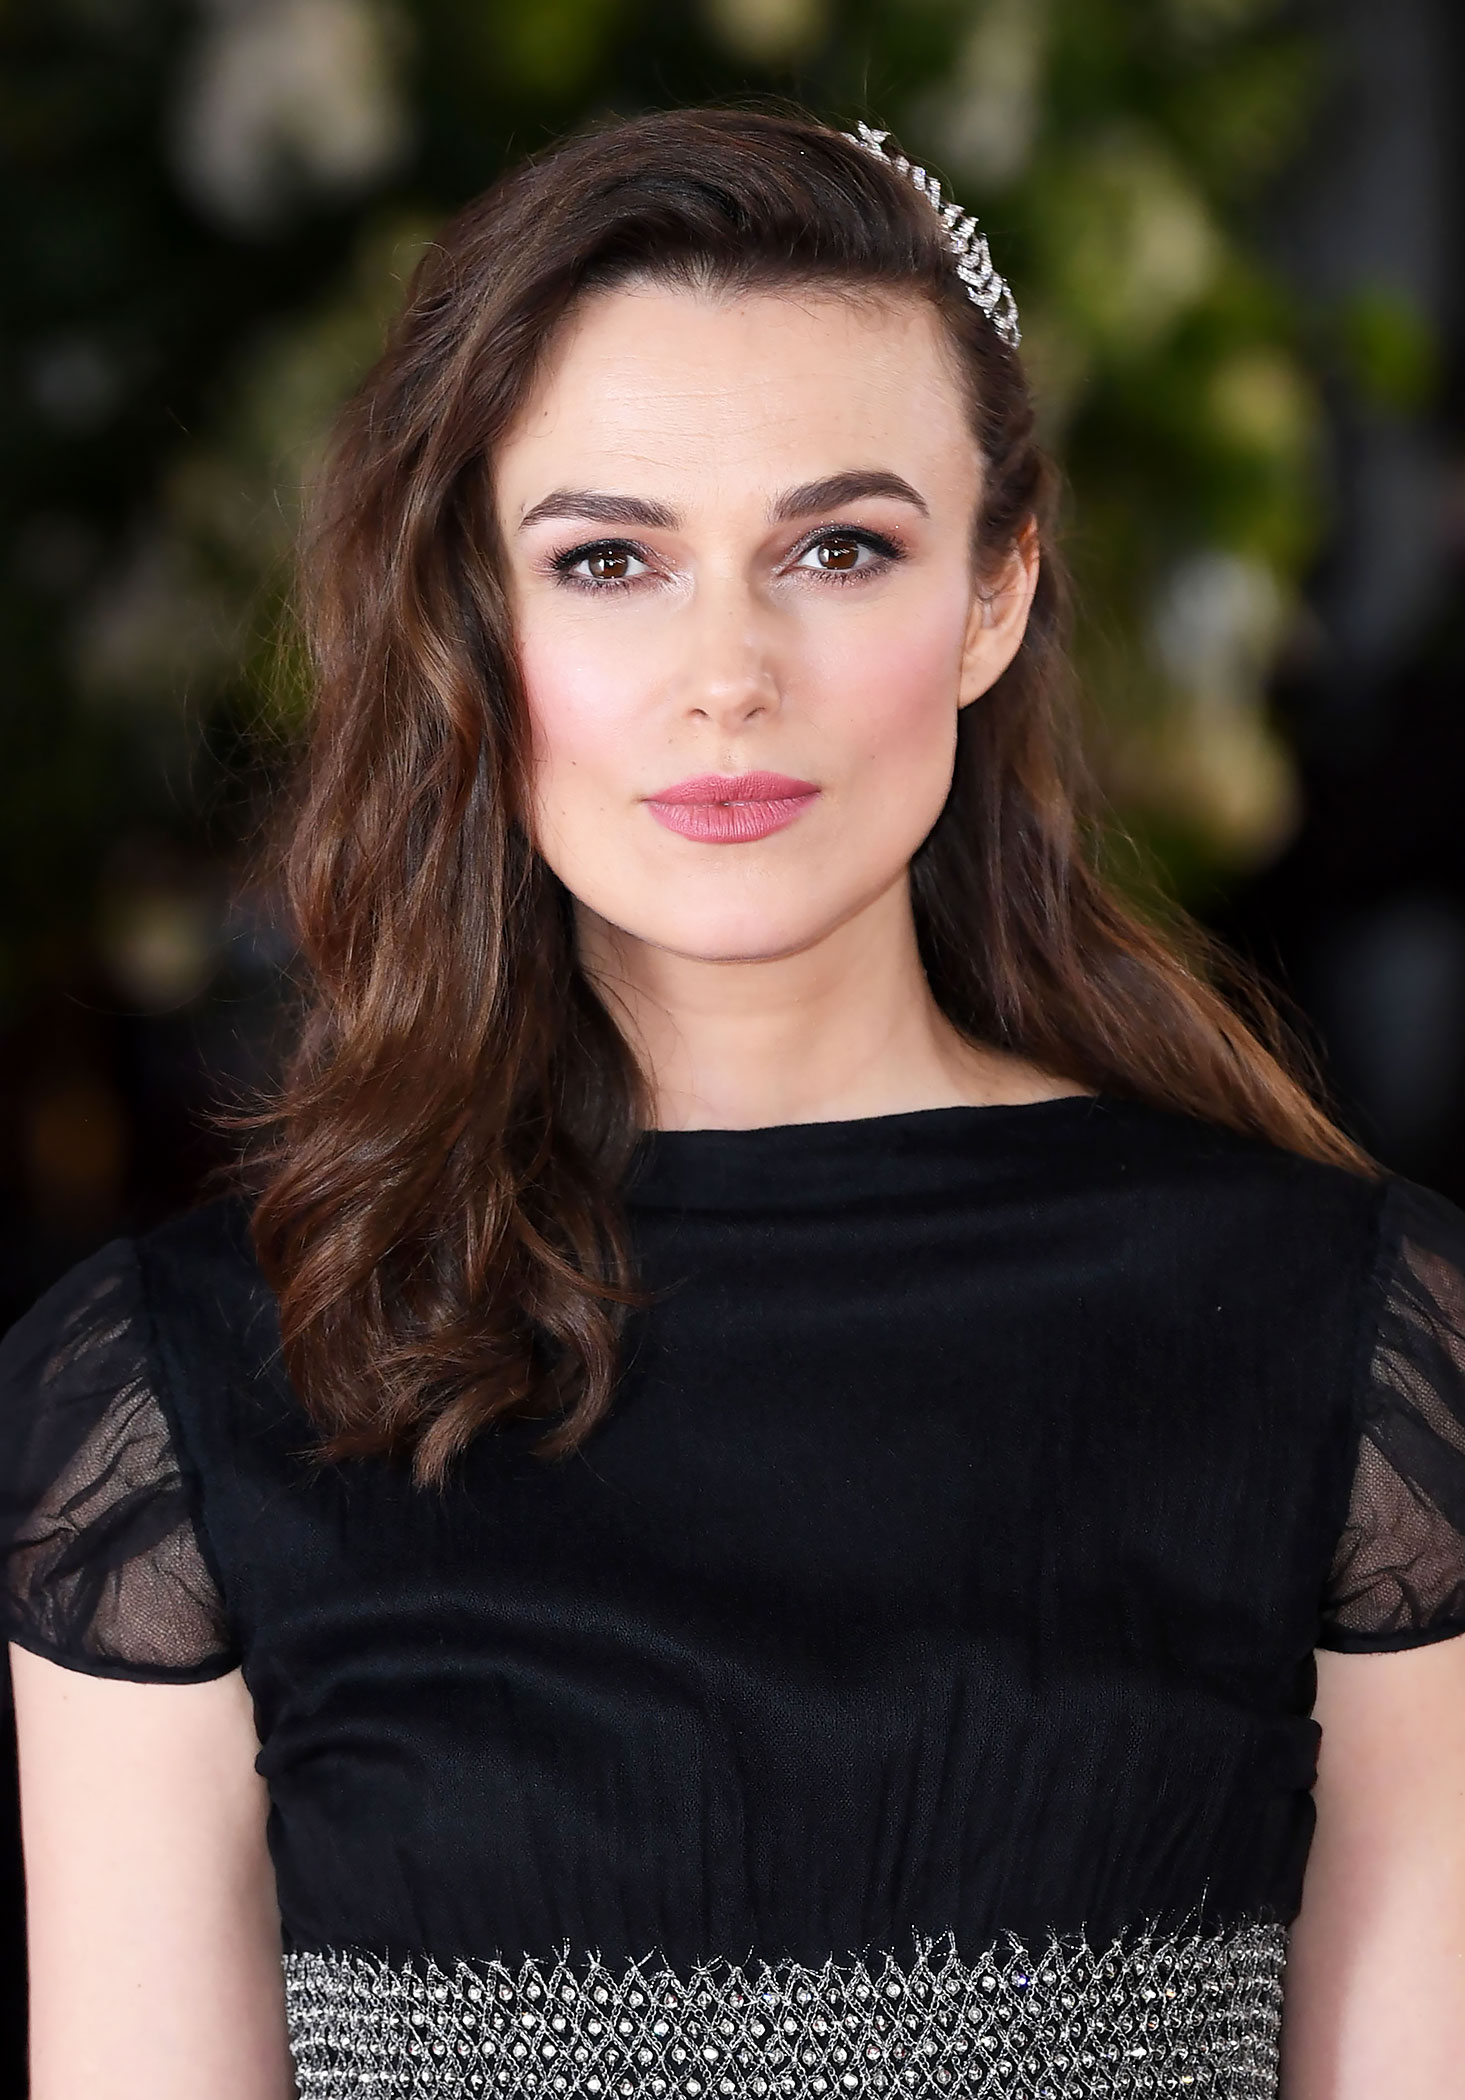 Keira Knightley, Daughters Wore Chanel Every Day of Quarantine